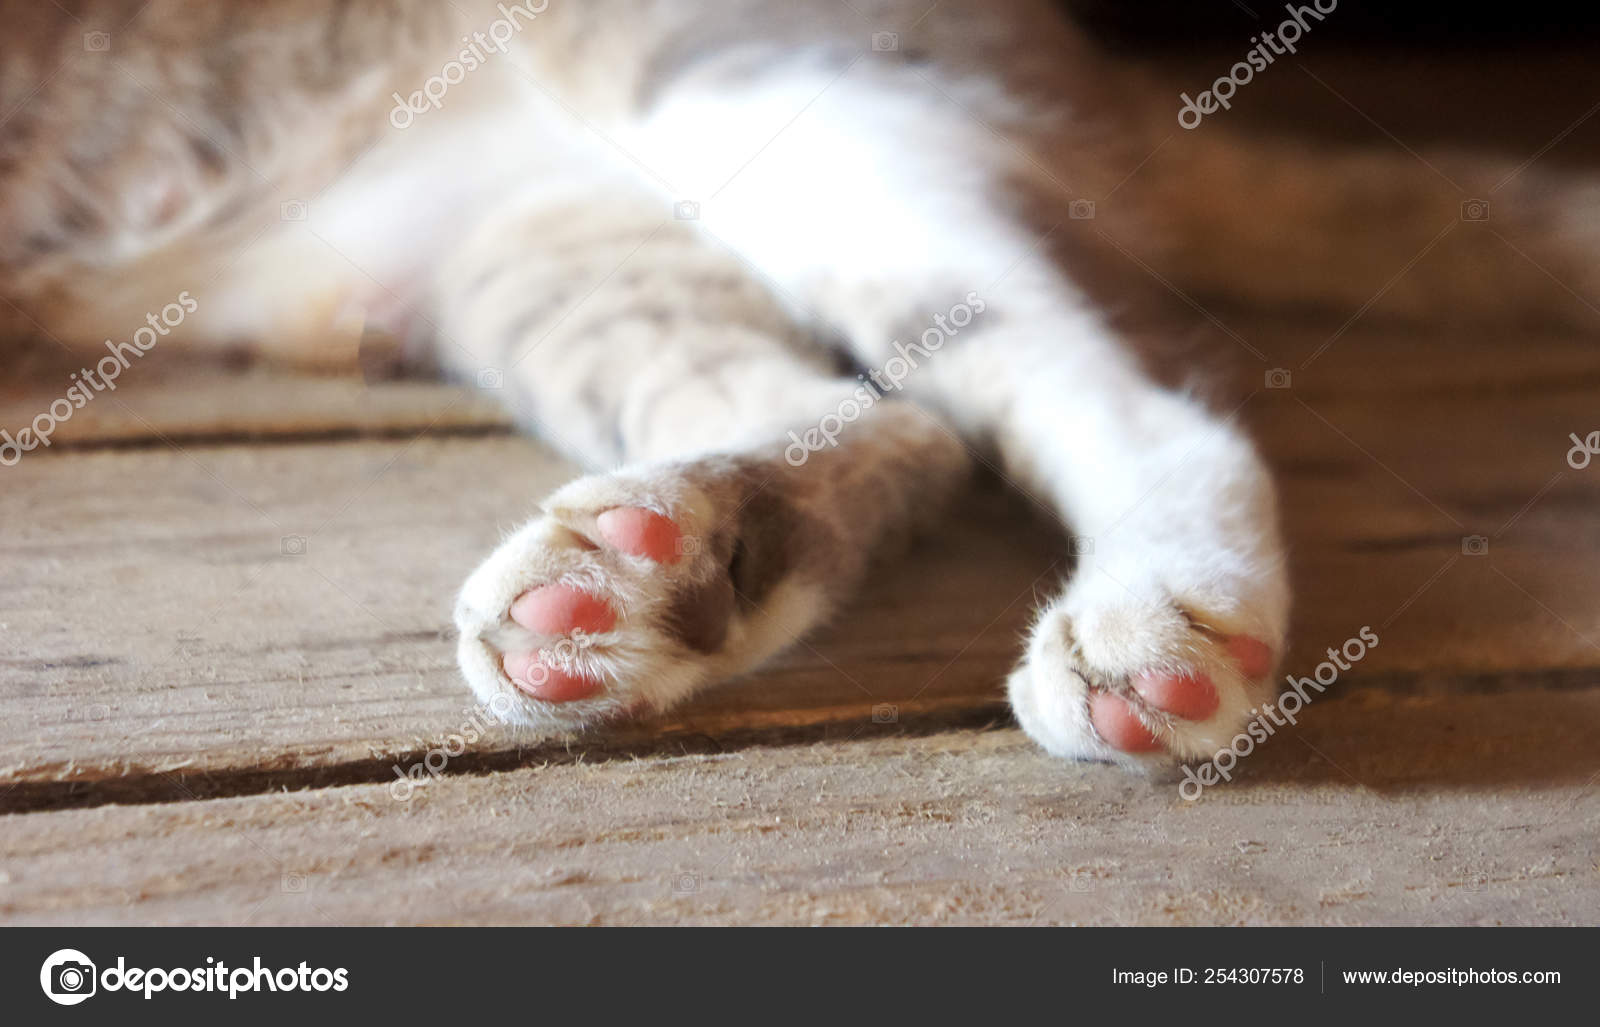 Cat S Paws Back On The Wooden Floor Striped Gray Paws Dirty